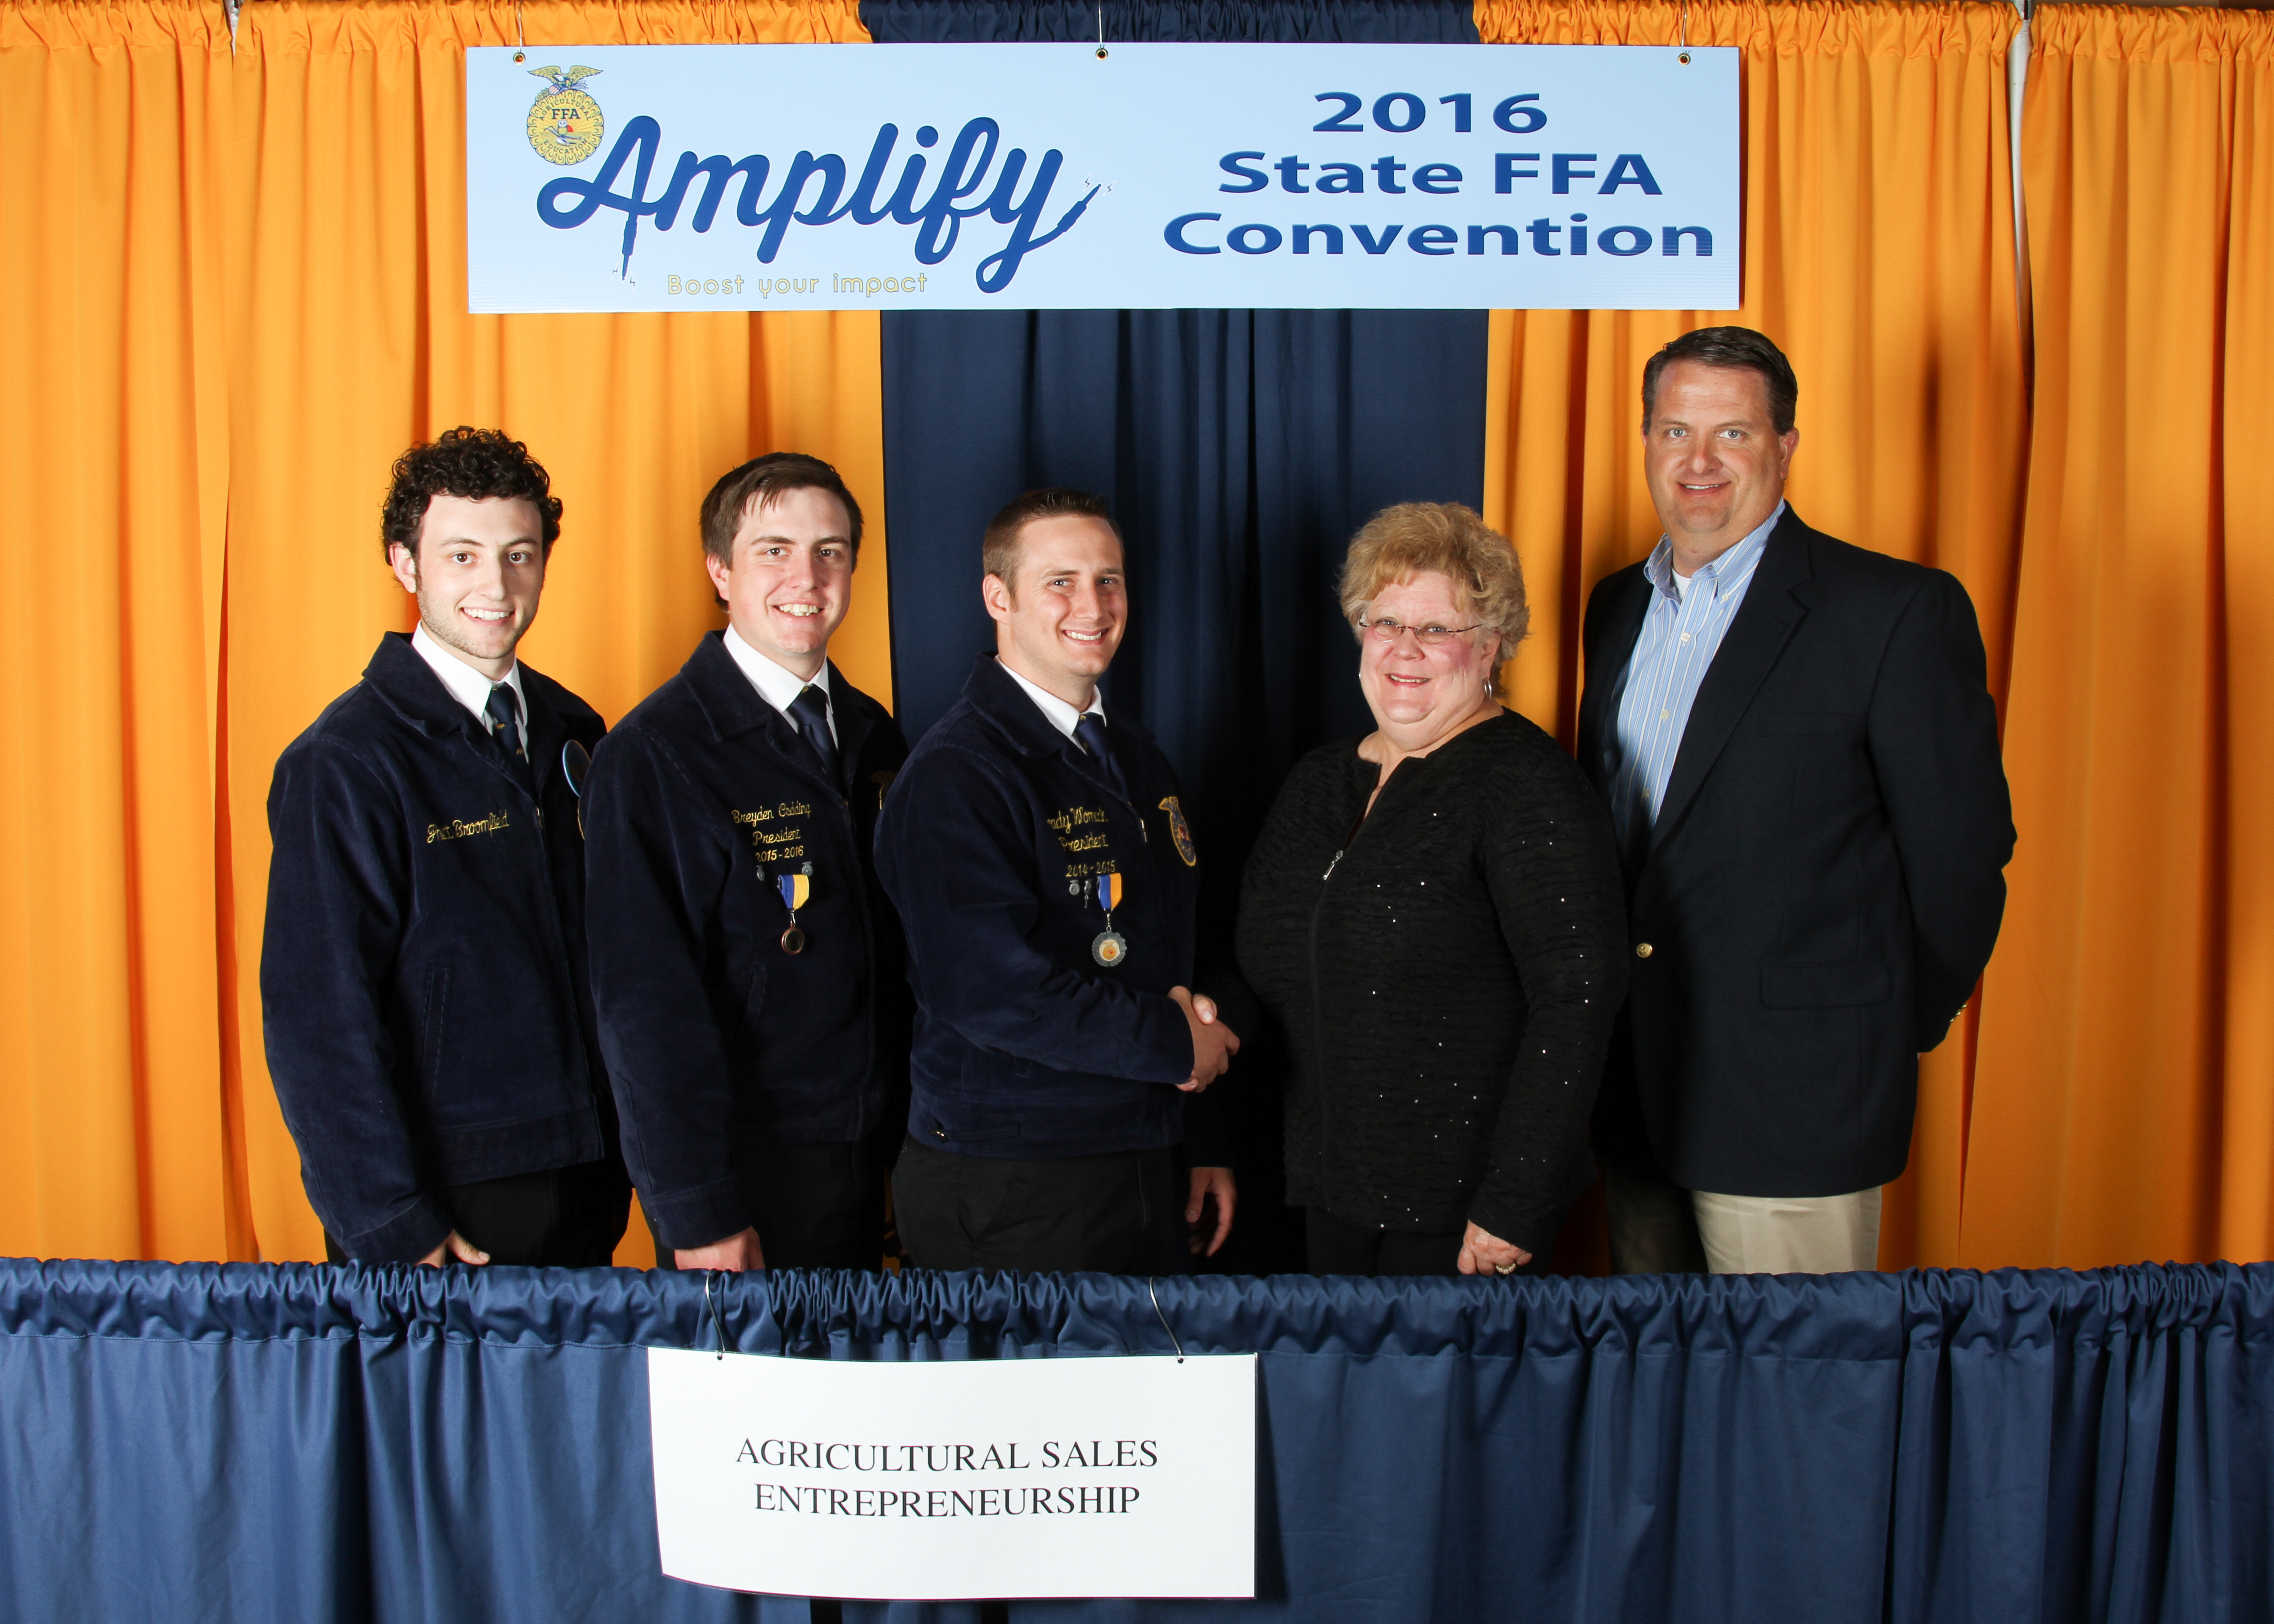 Brady Womack (third from left) of the Morris FFA Chapter captured first-place honors in the 2016 Oklahoma FFA Agricultural Sales Entrepreneurship State Proficiency Award area. Joes Jones (right) of Livingston Machinery and Linda Shepard (second from right) of Pioneer Cellular congratulate Womack as well as Jhett Broomfield (left) of the Hennessey FFA Chapter and Breyden Codding of the Guthrie FFA Chapter, who received second and third place, respectively.